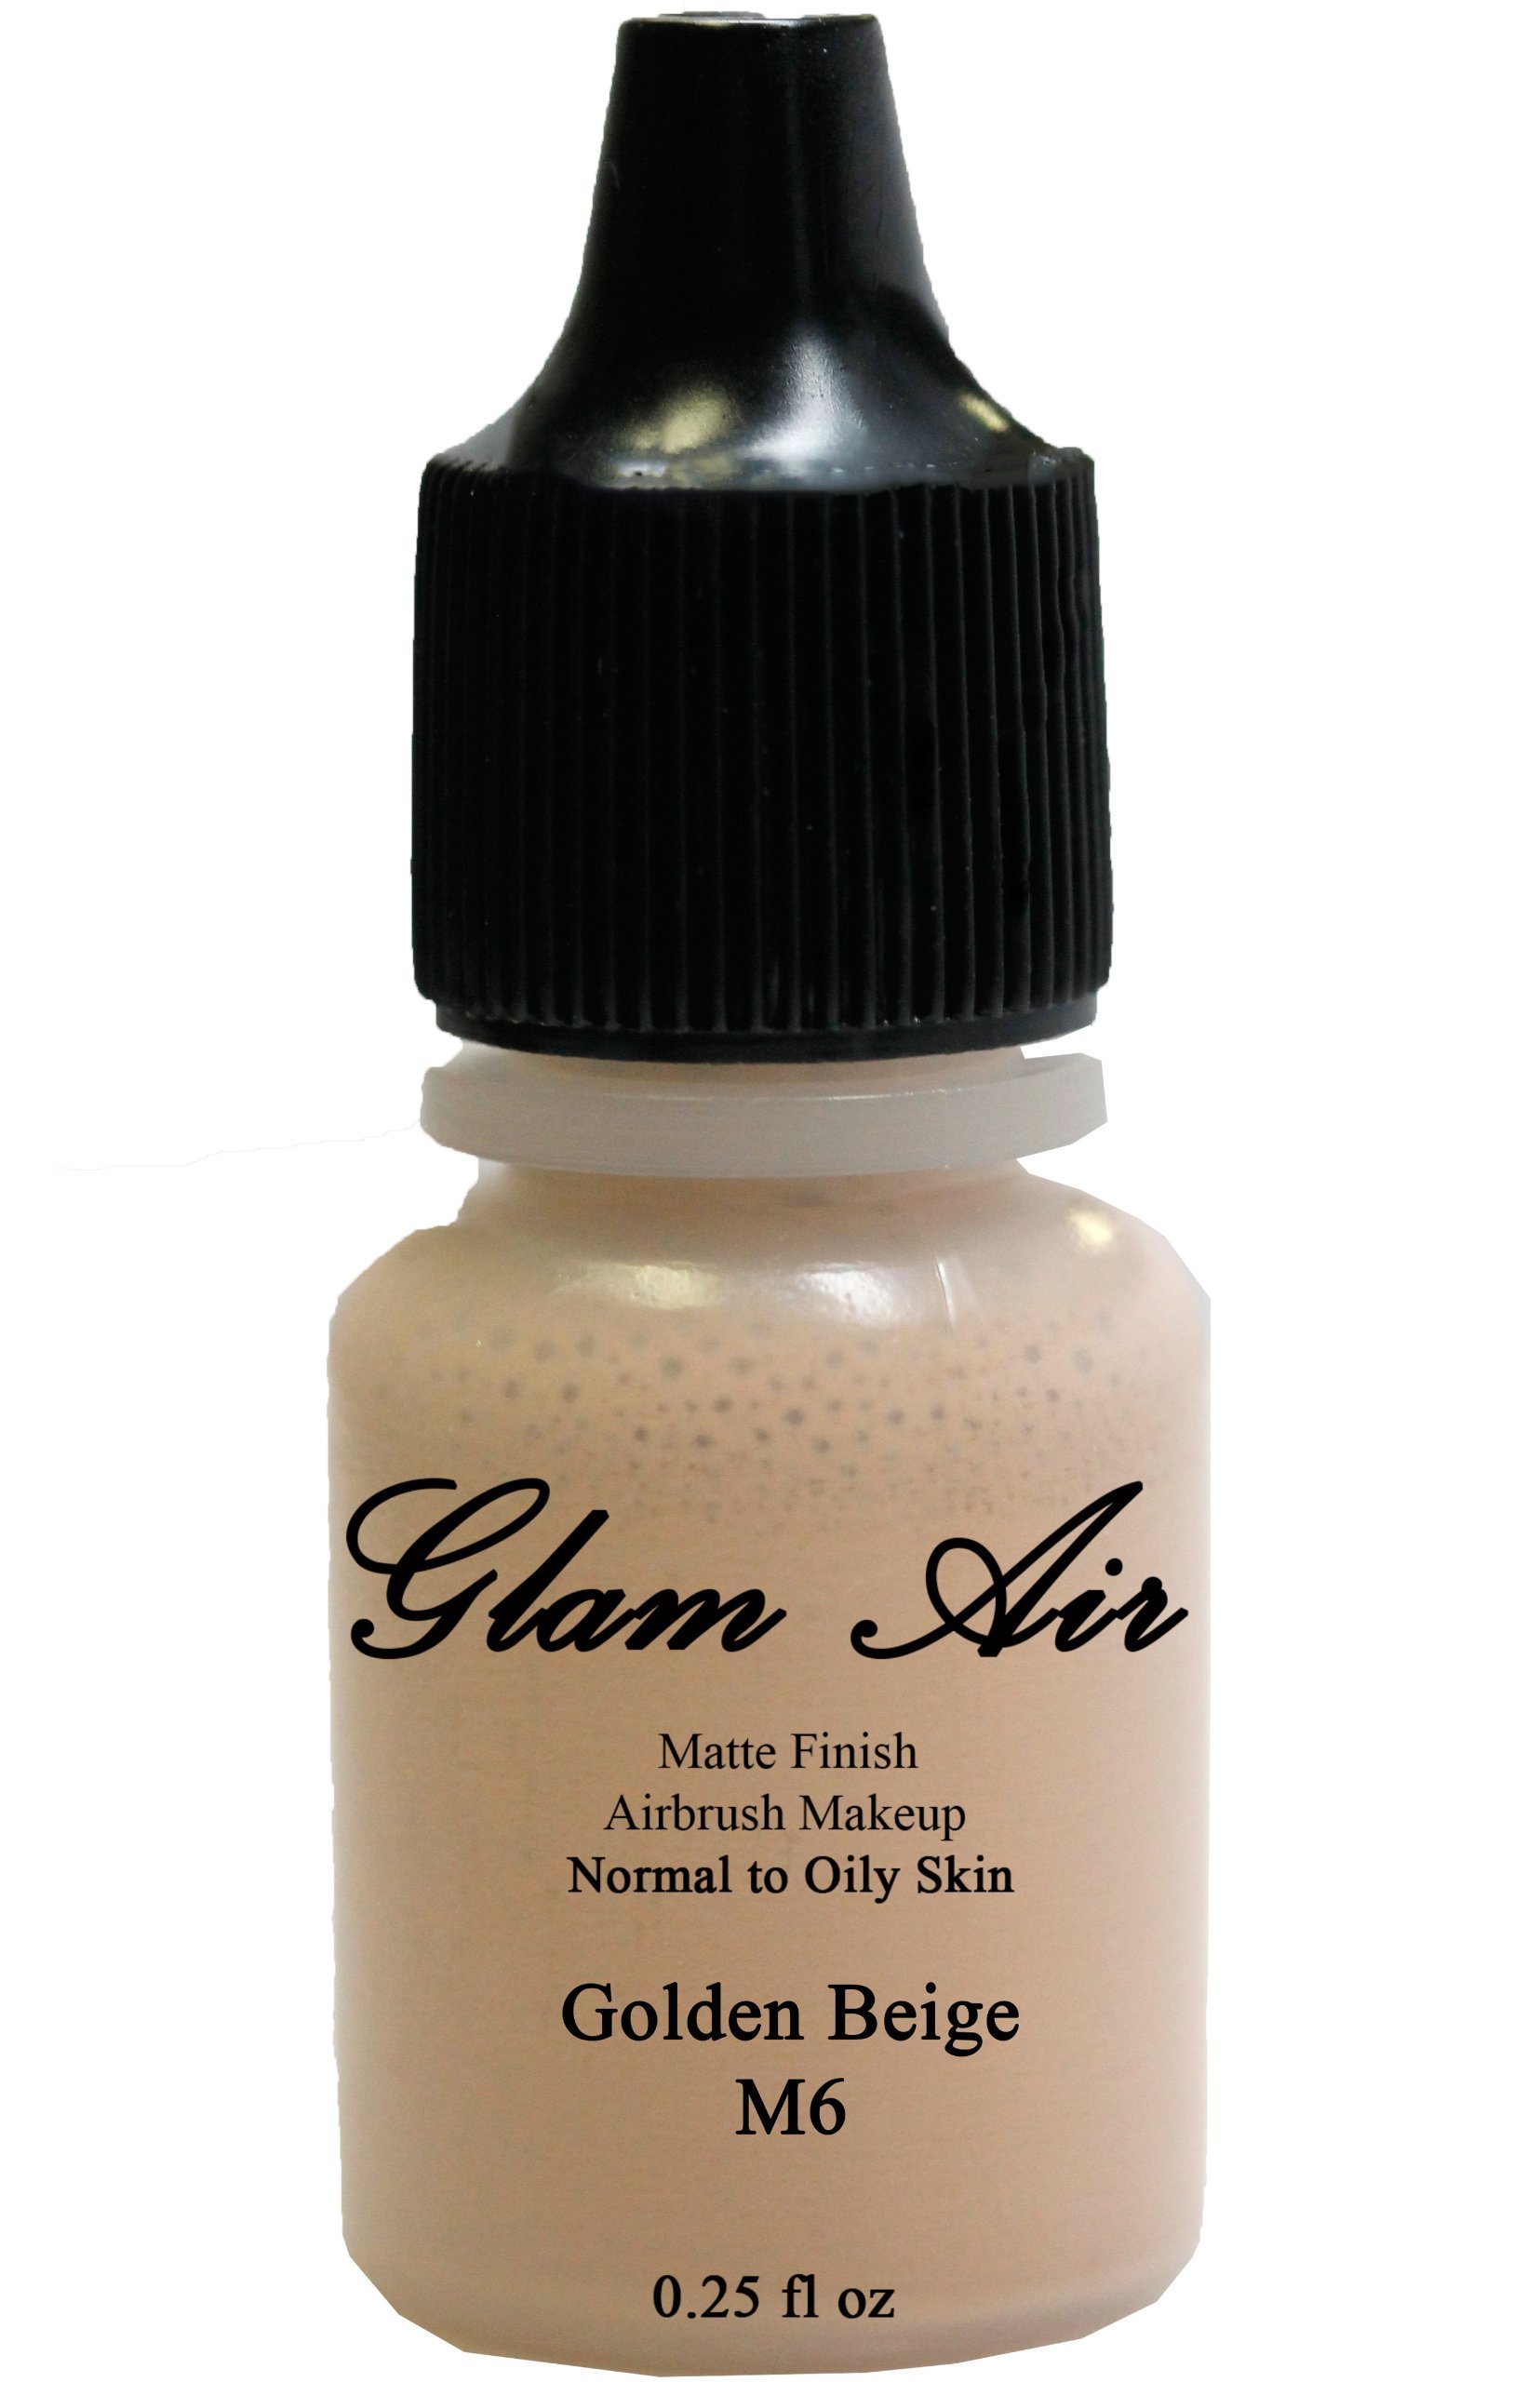 Glam Air Airbrush Makeup Water Based Foundation in Matte Finish for Flawless Looking Skin (0.25oz Bottles) (M6 GOLDEN BEIGE)